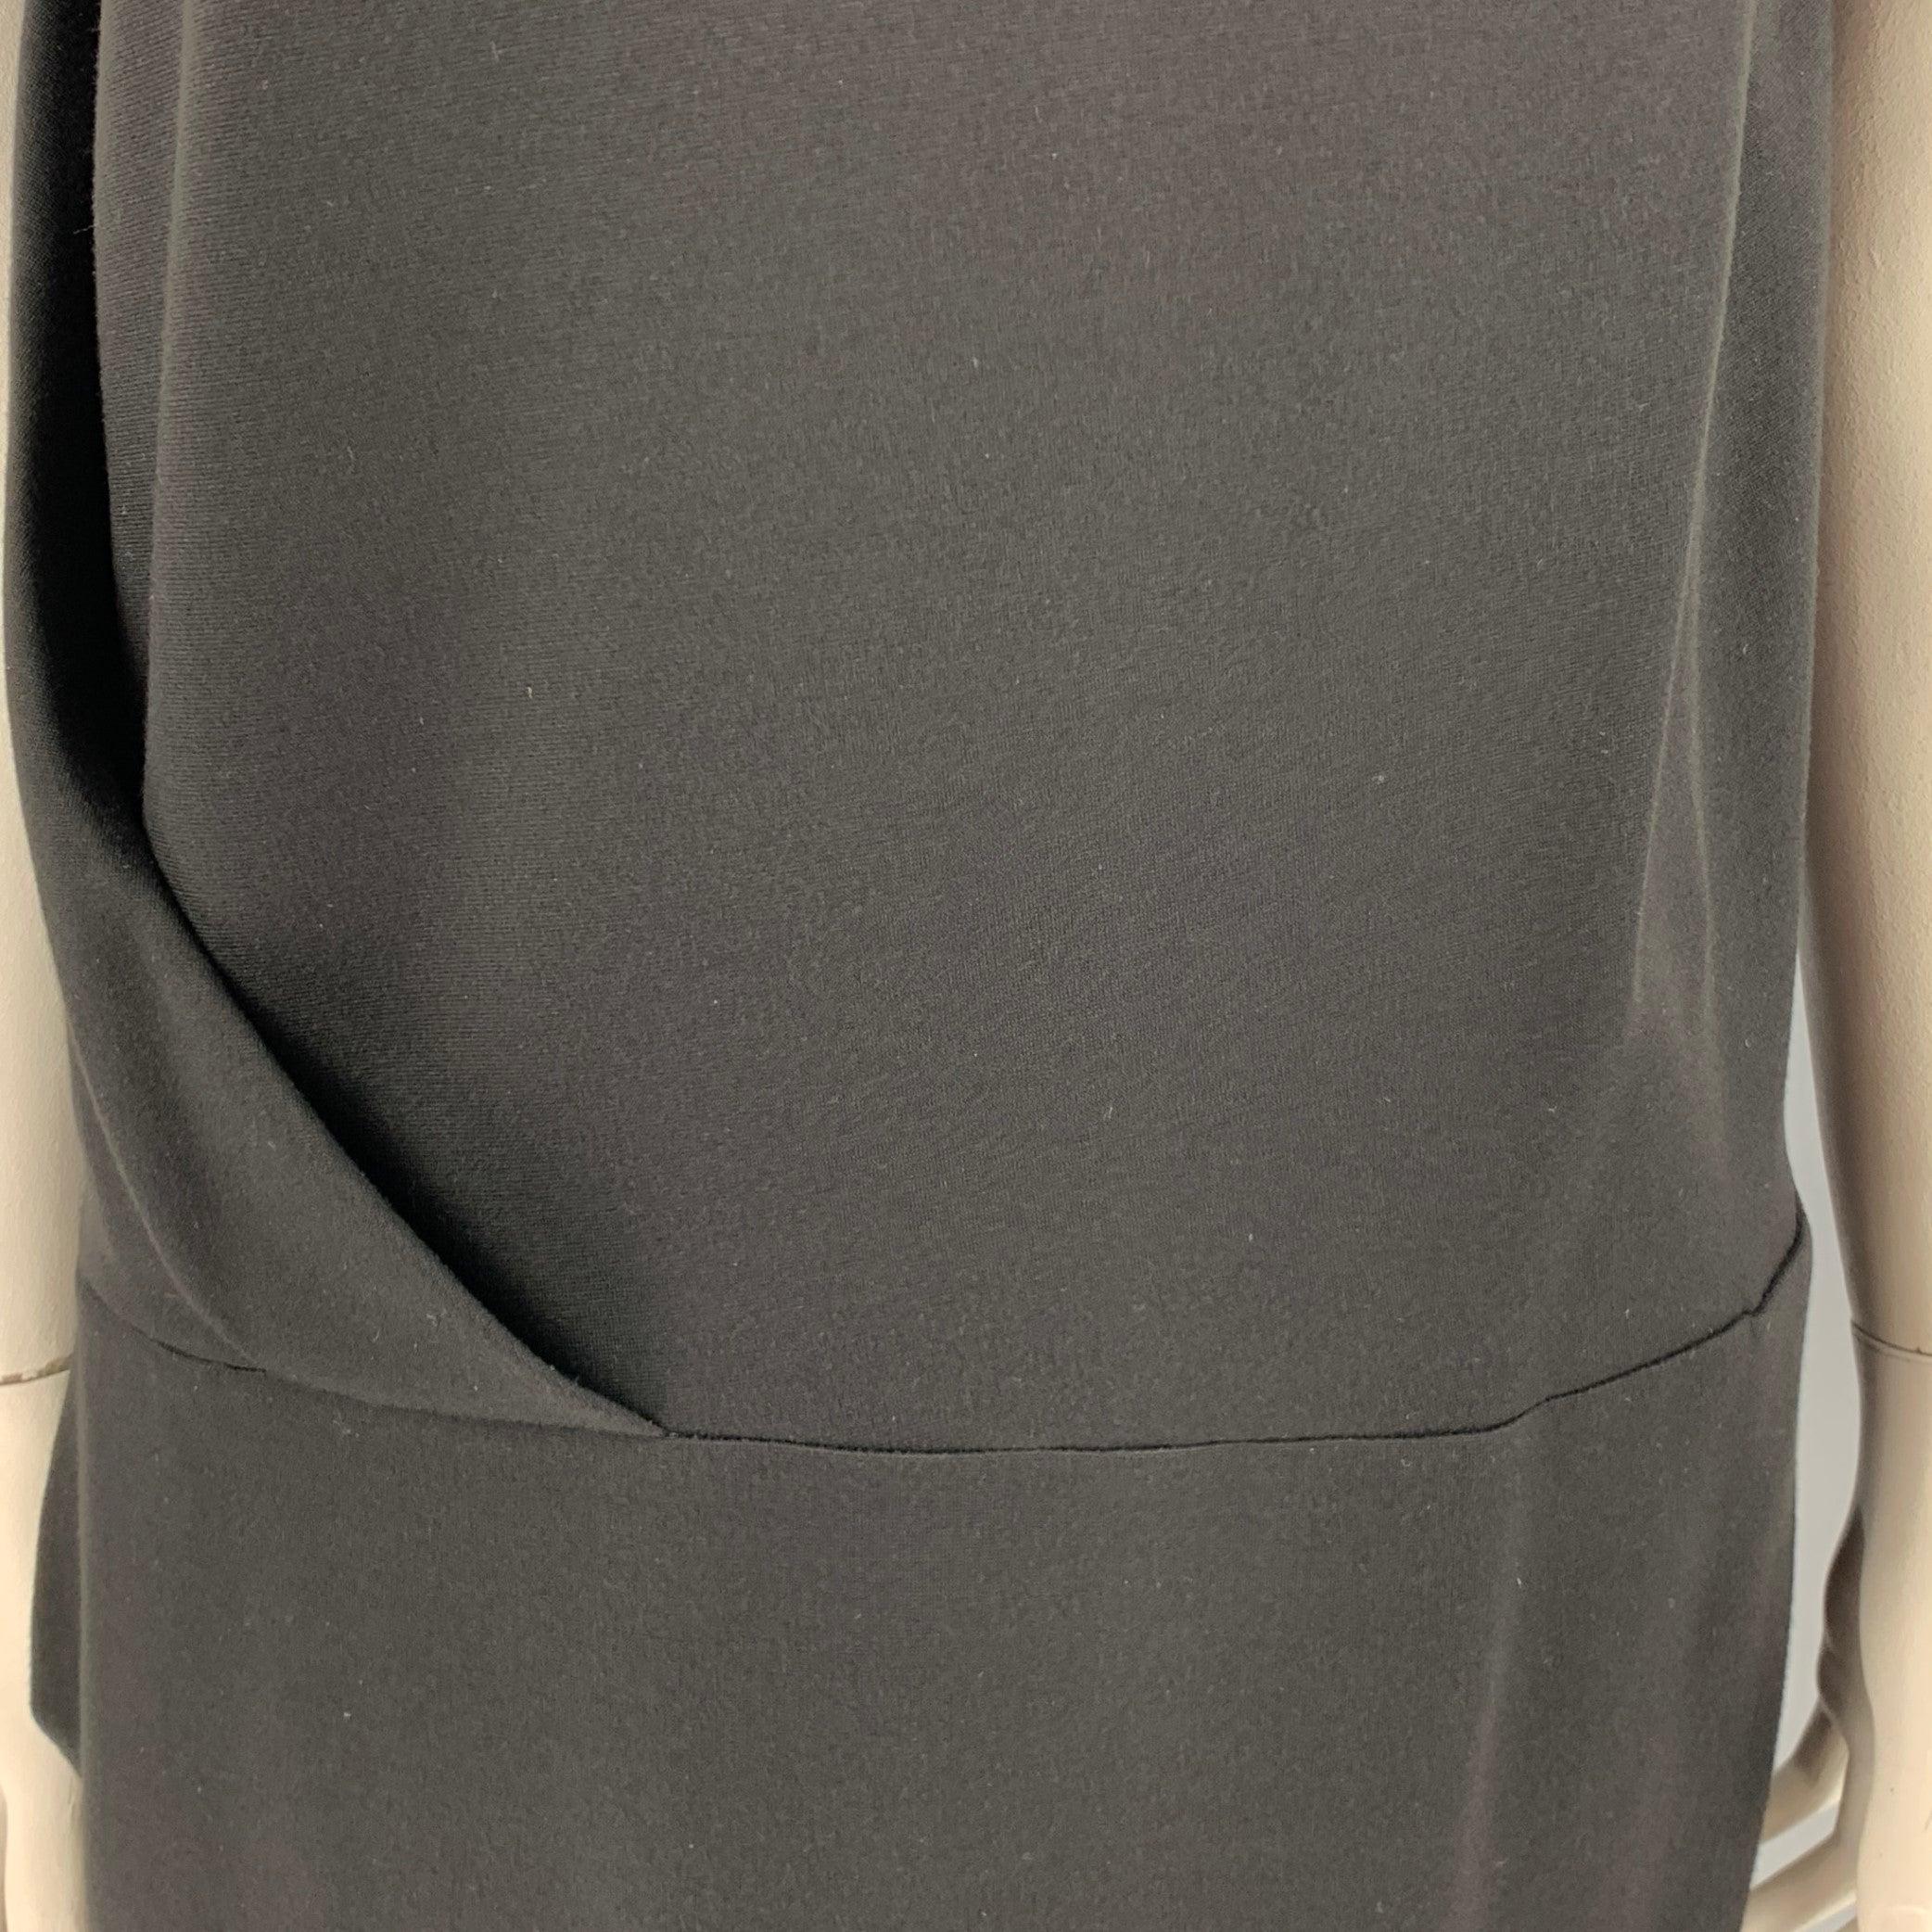 CACHAREL dress
in a black nylon blend fabric featuring a sleeveless style with drape and fold details, drop waist, two pockets, and side zipper closure.Very Good Pre-Owned Condition.
Mark at hem. 

Marked:   IT 48 

Measurements: 
 
Shoulder: 18